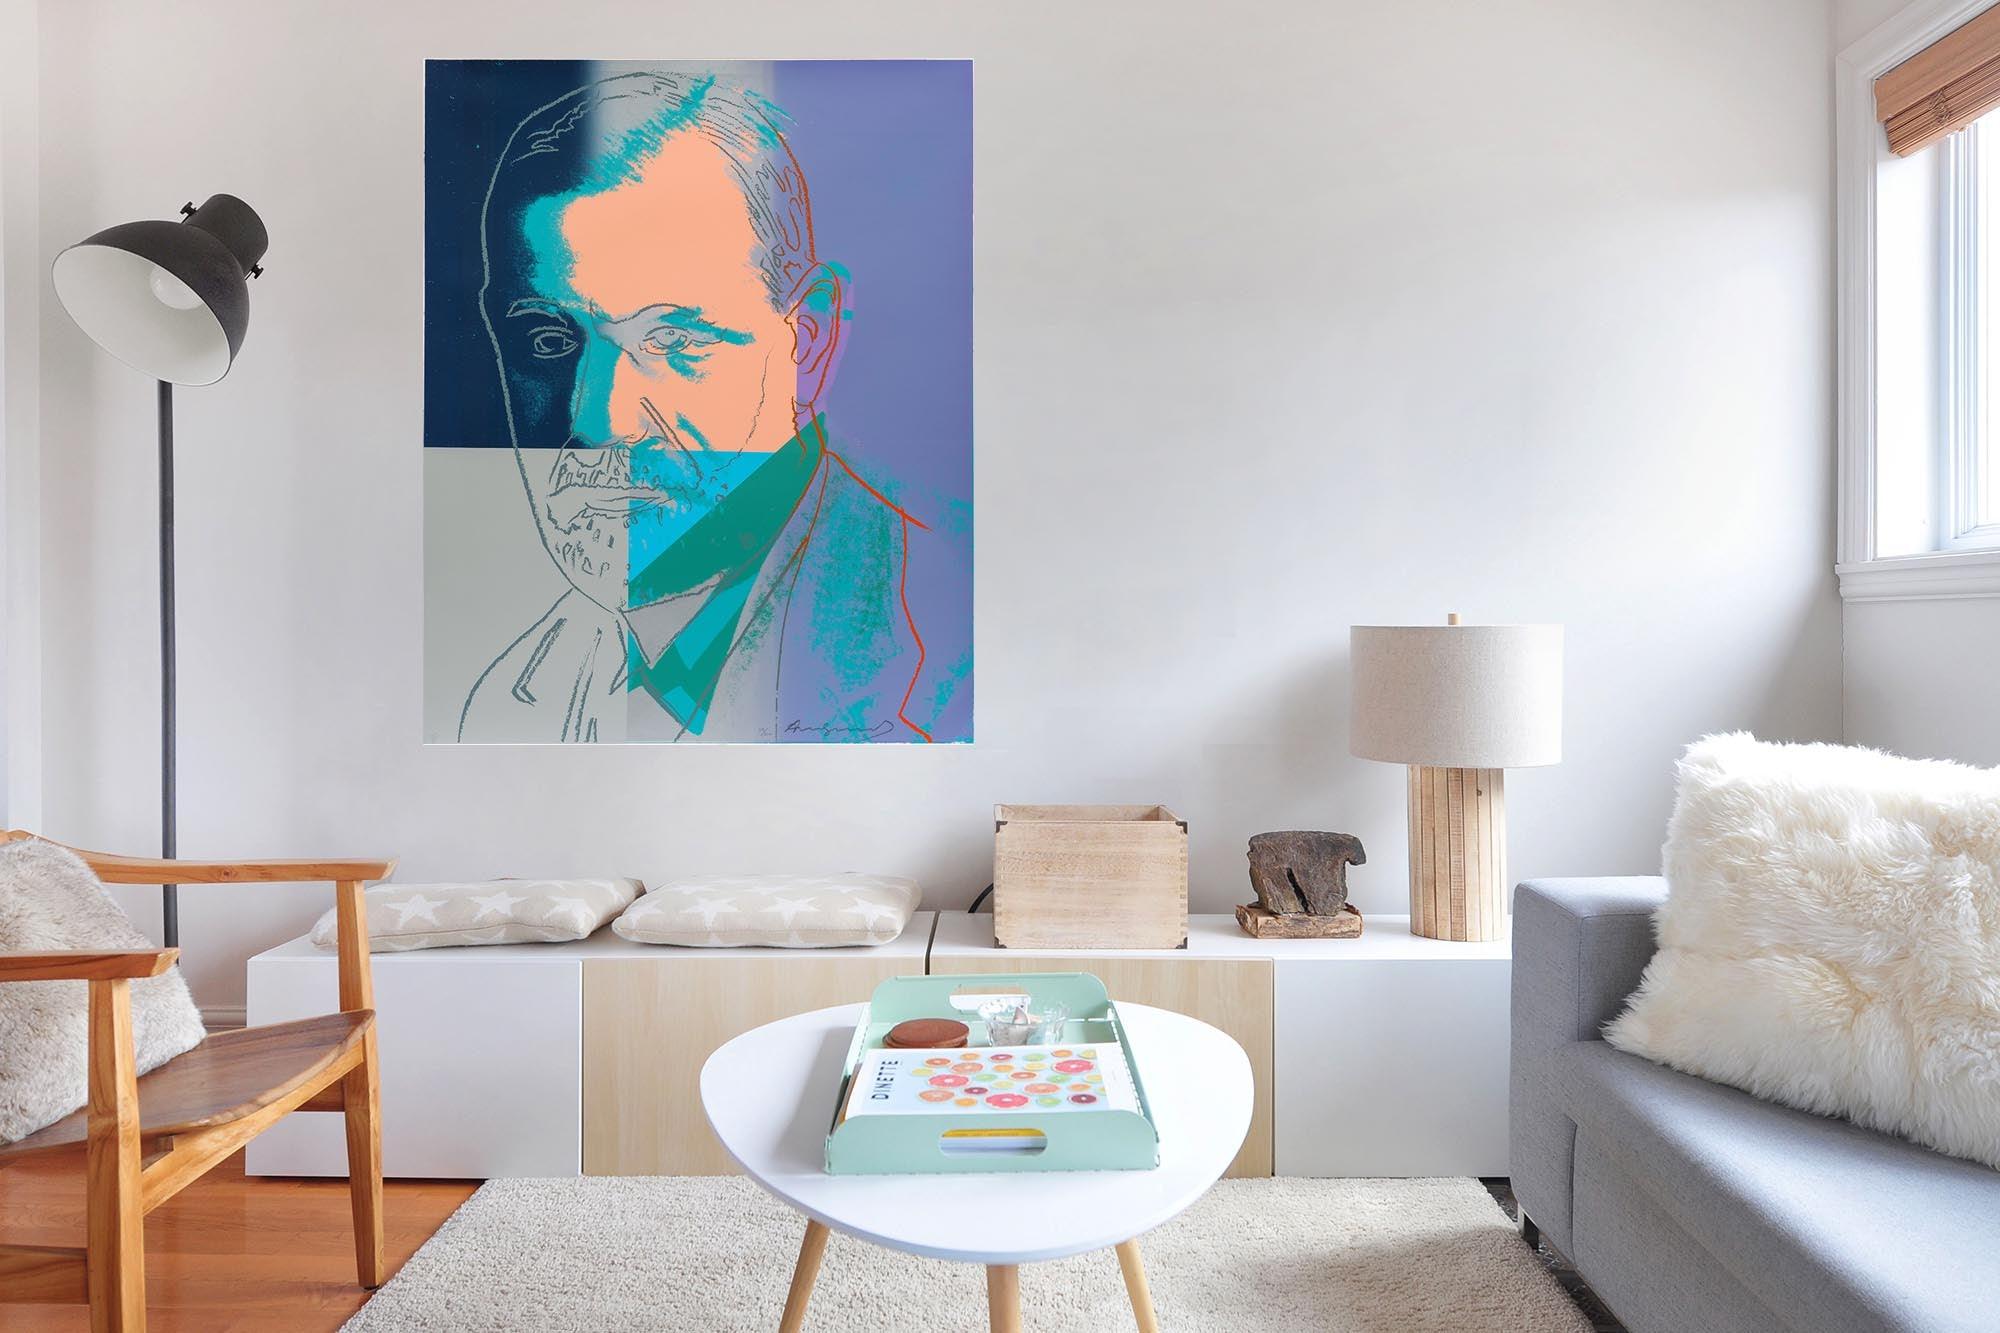 CoolWalls.ca Posters, Prints, & Visual Artwork Sigmund Freud from the series "Ten Portraits of Jews of The Twentieth Century" Andy Warhol Vintage Artwork: Peel_n_Stick onto the wall, wallpaper like fabric